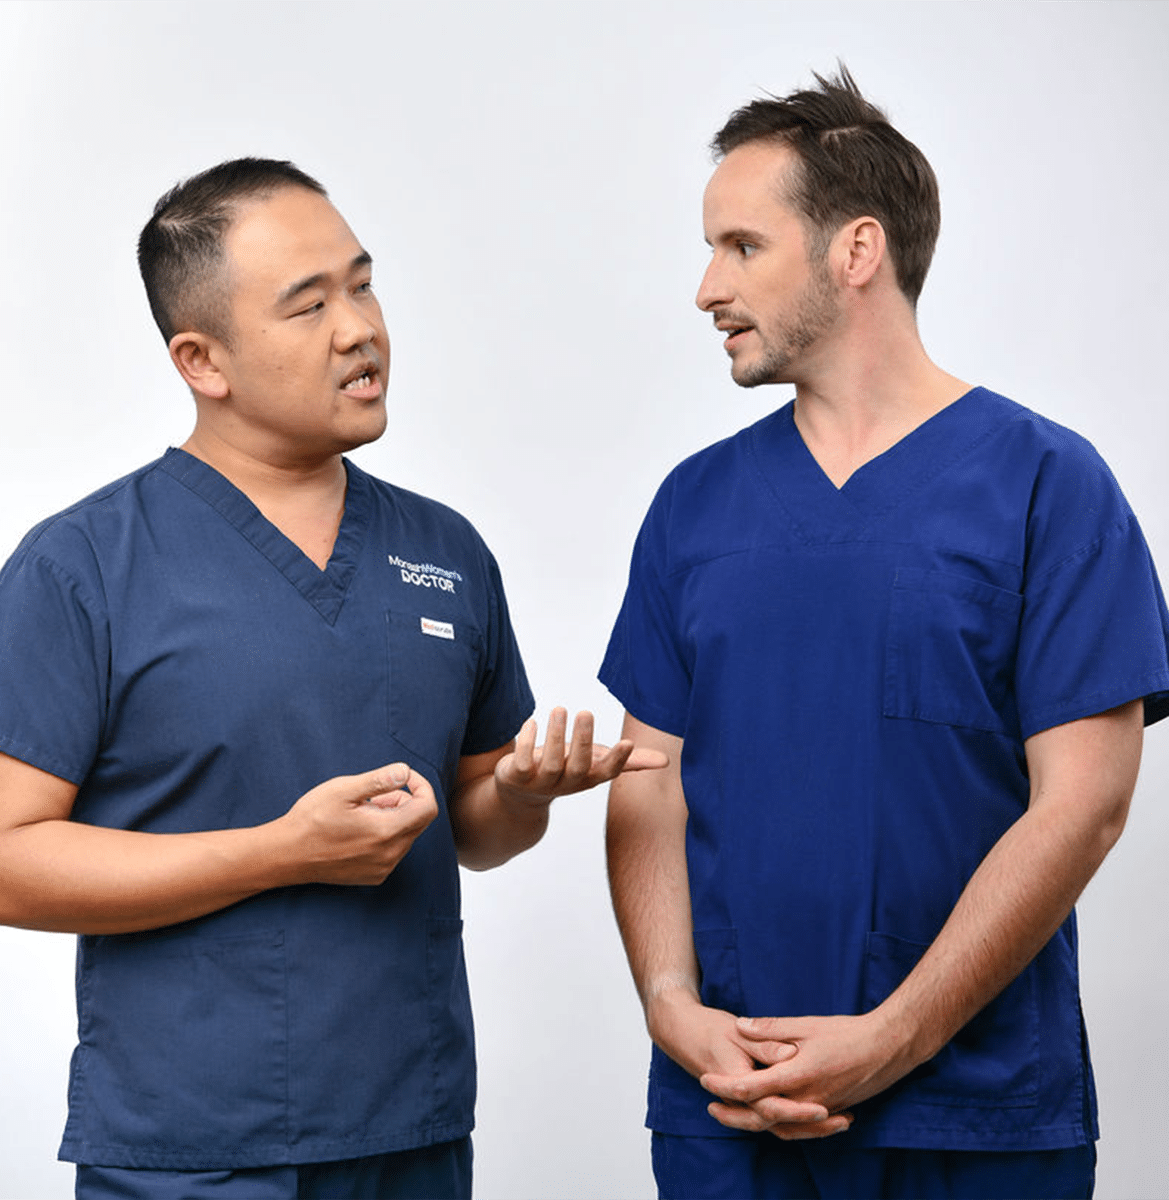 Two clinicians wearing scrubs have a conversation